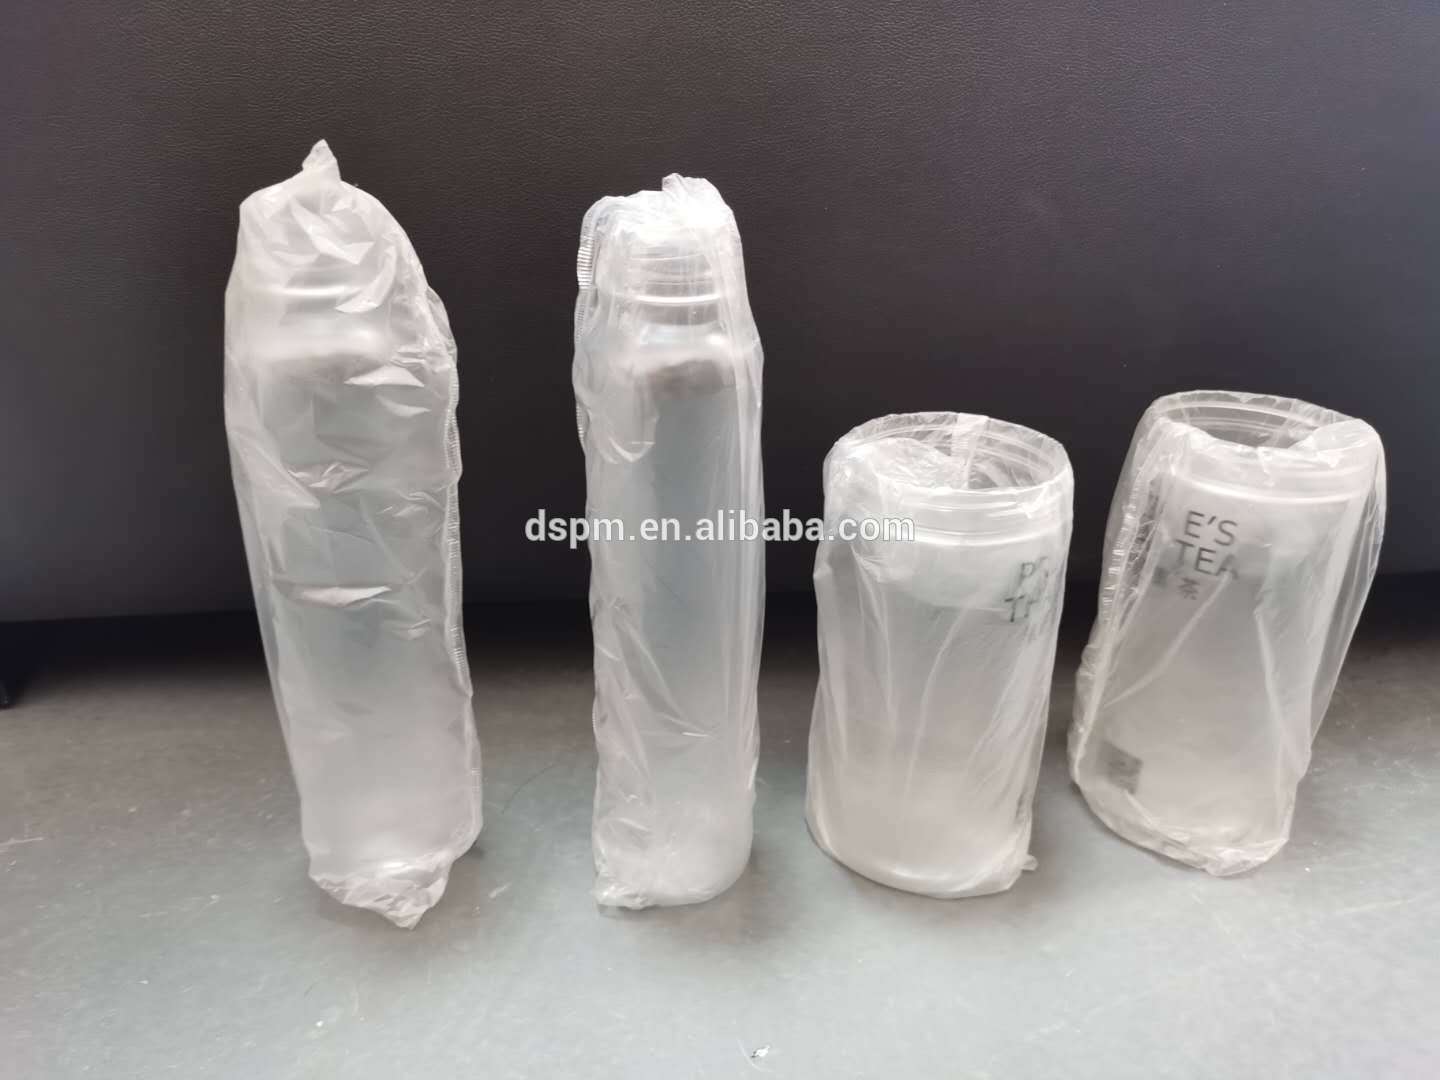 Dession brand cup glass bottle sleeve wrapping machine for POF film